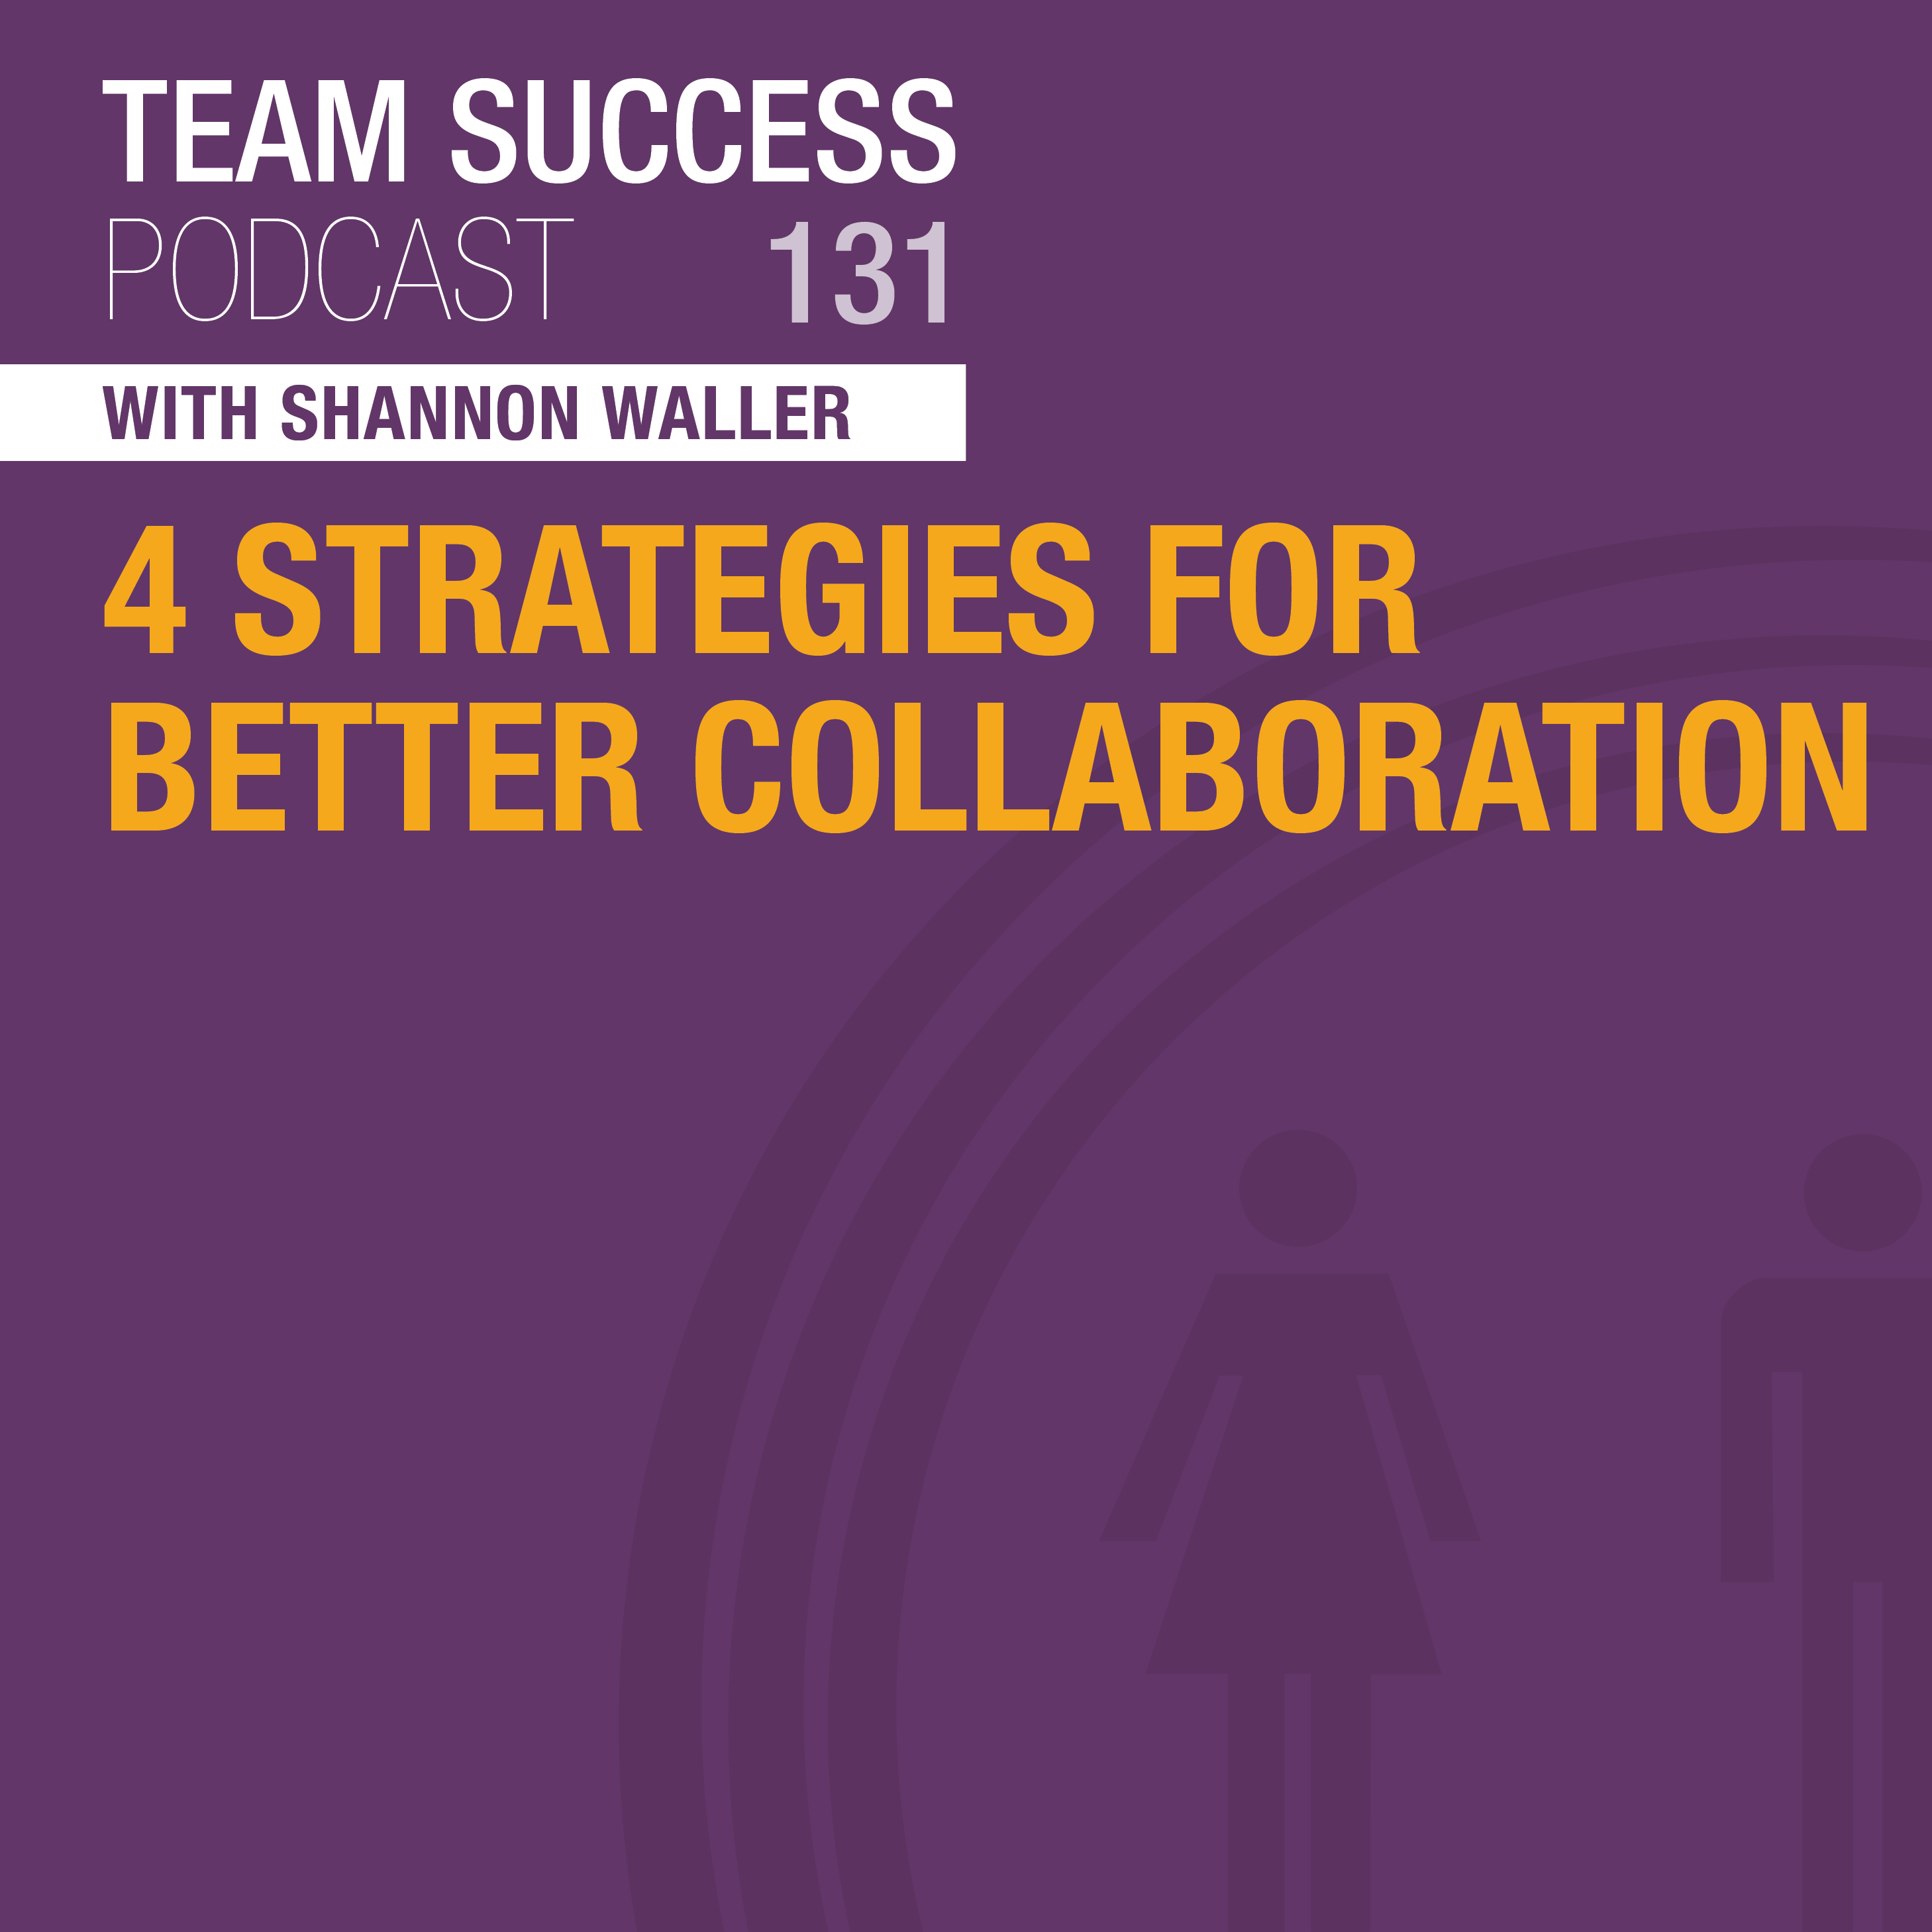 4 Strategies For Better Collaboration